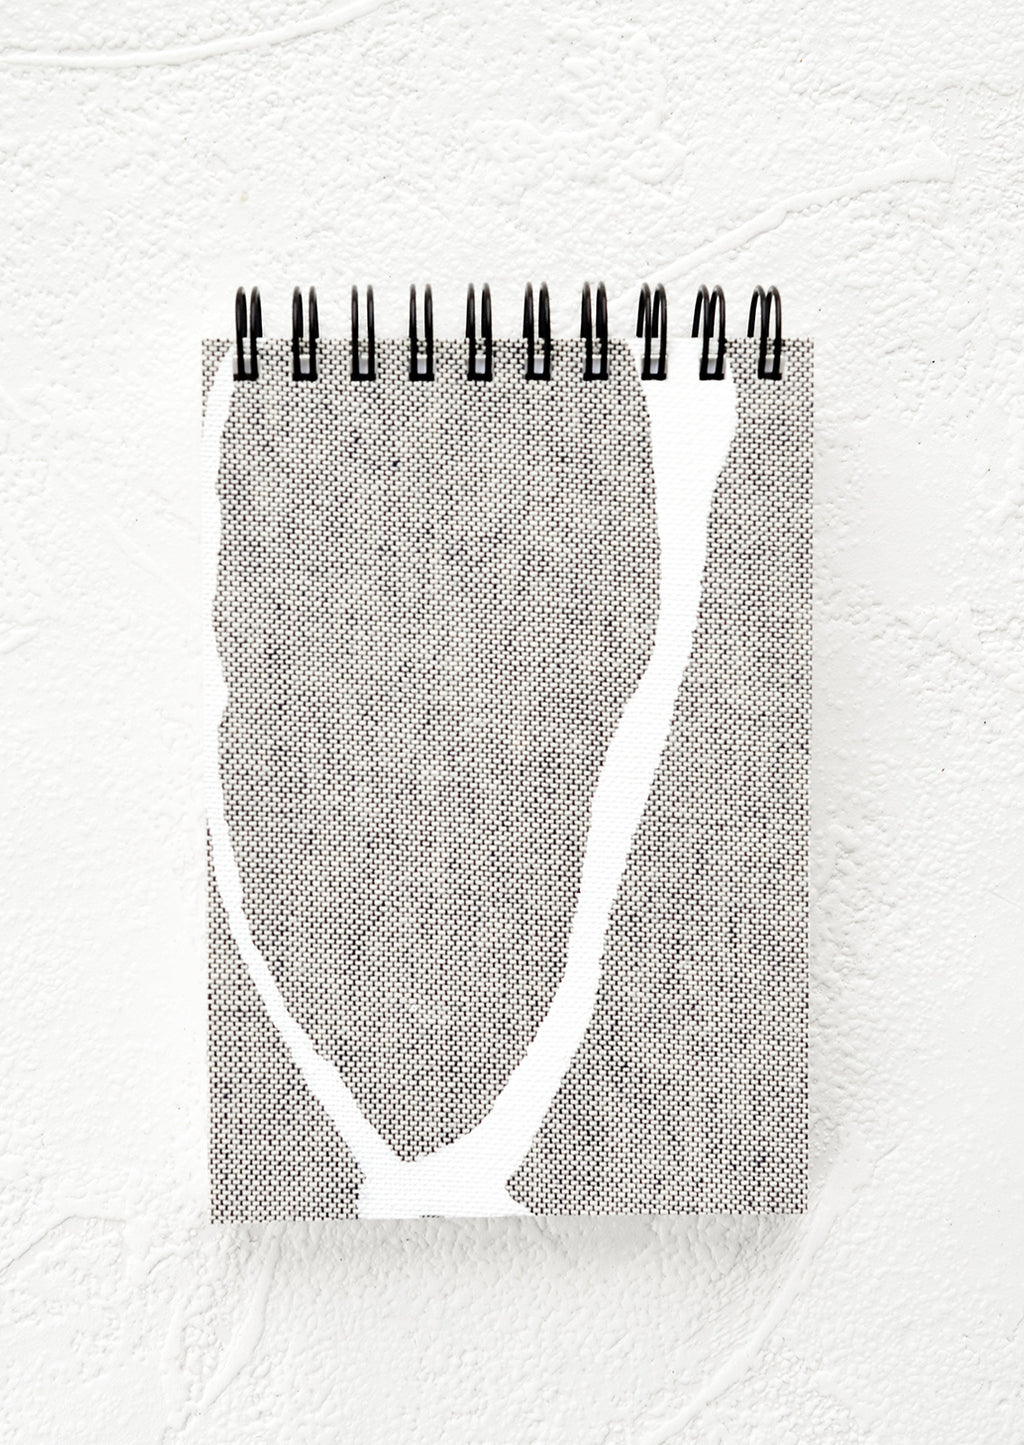 Grey Freeform: A small spiral bound pocket notebook with grey and white cover.